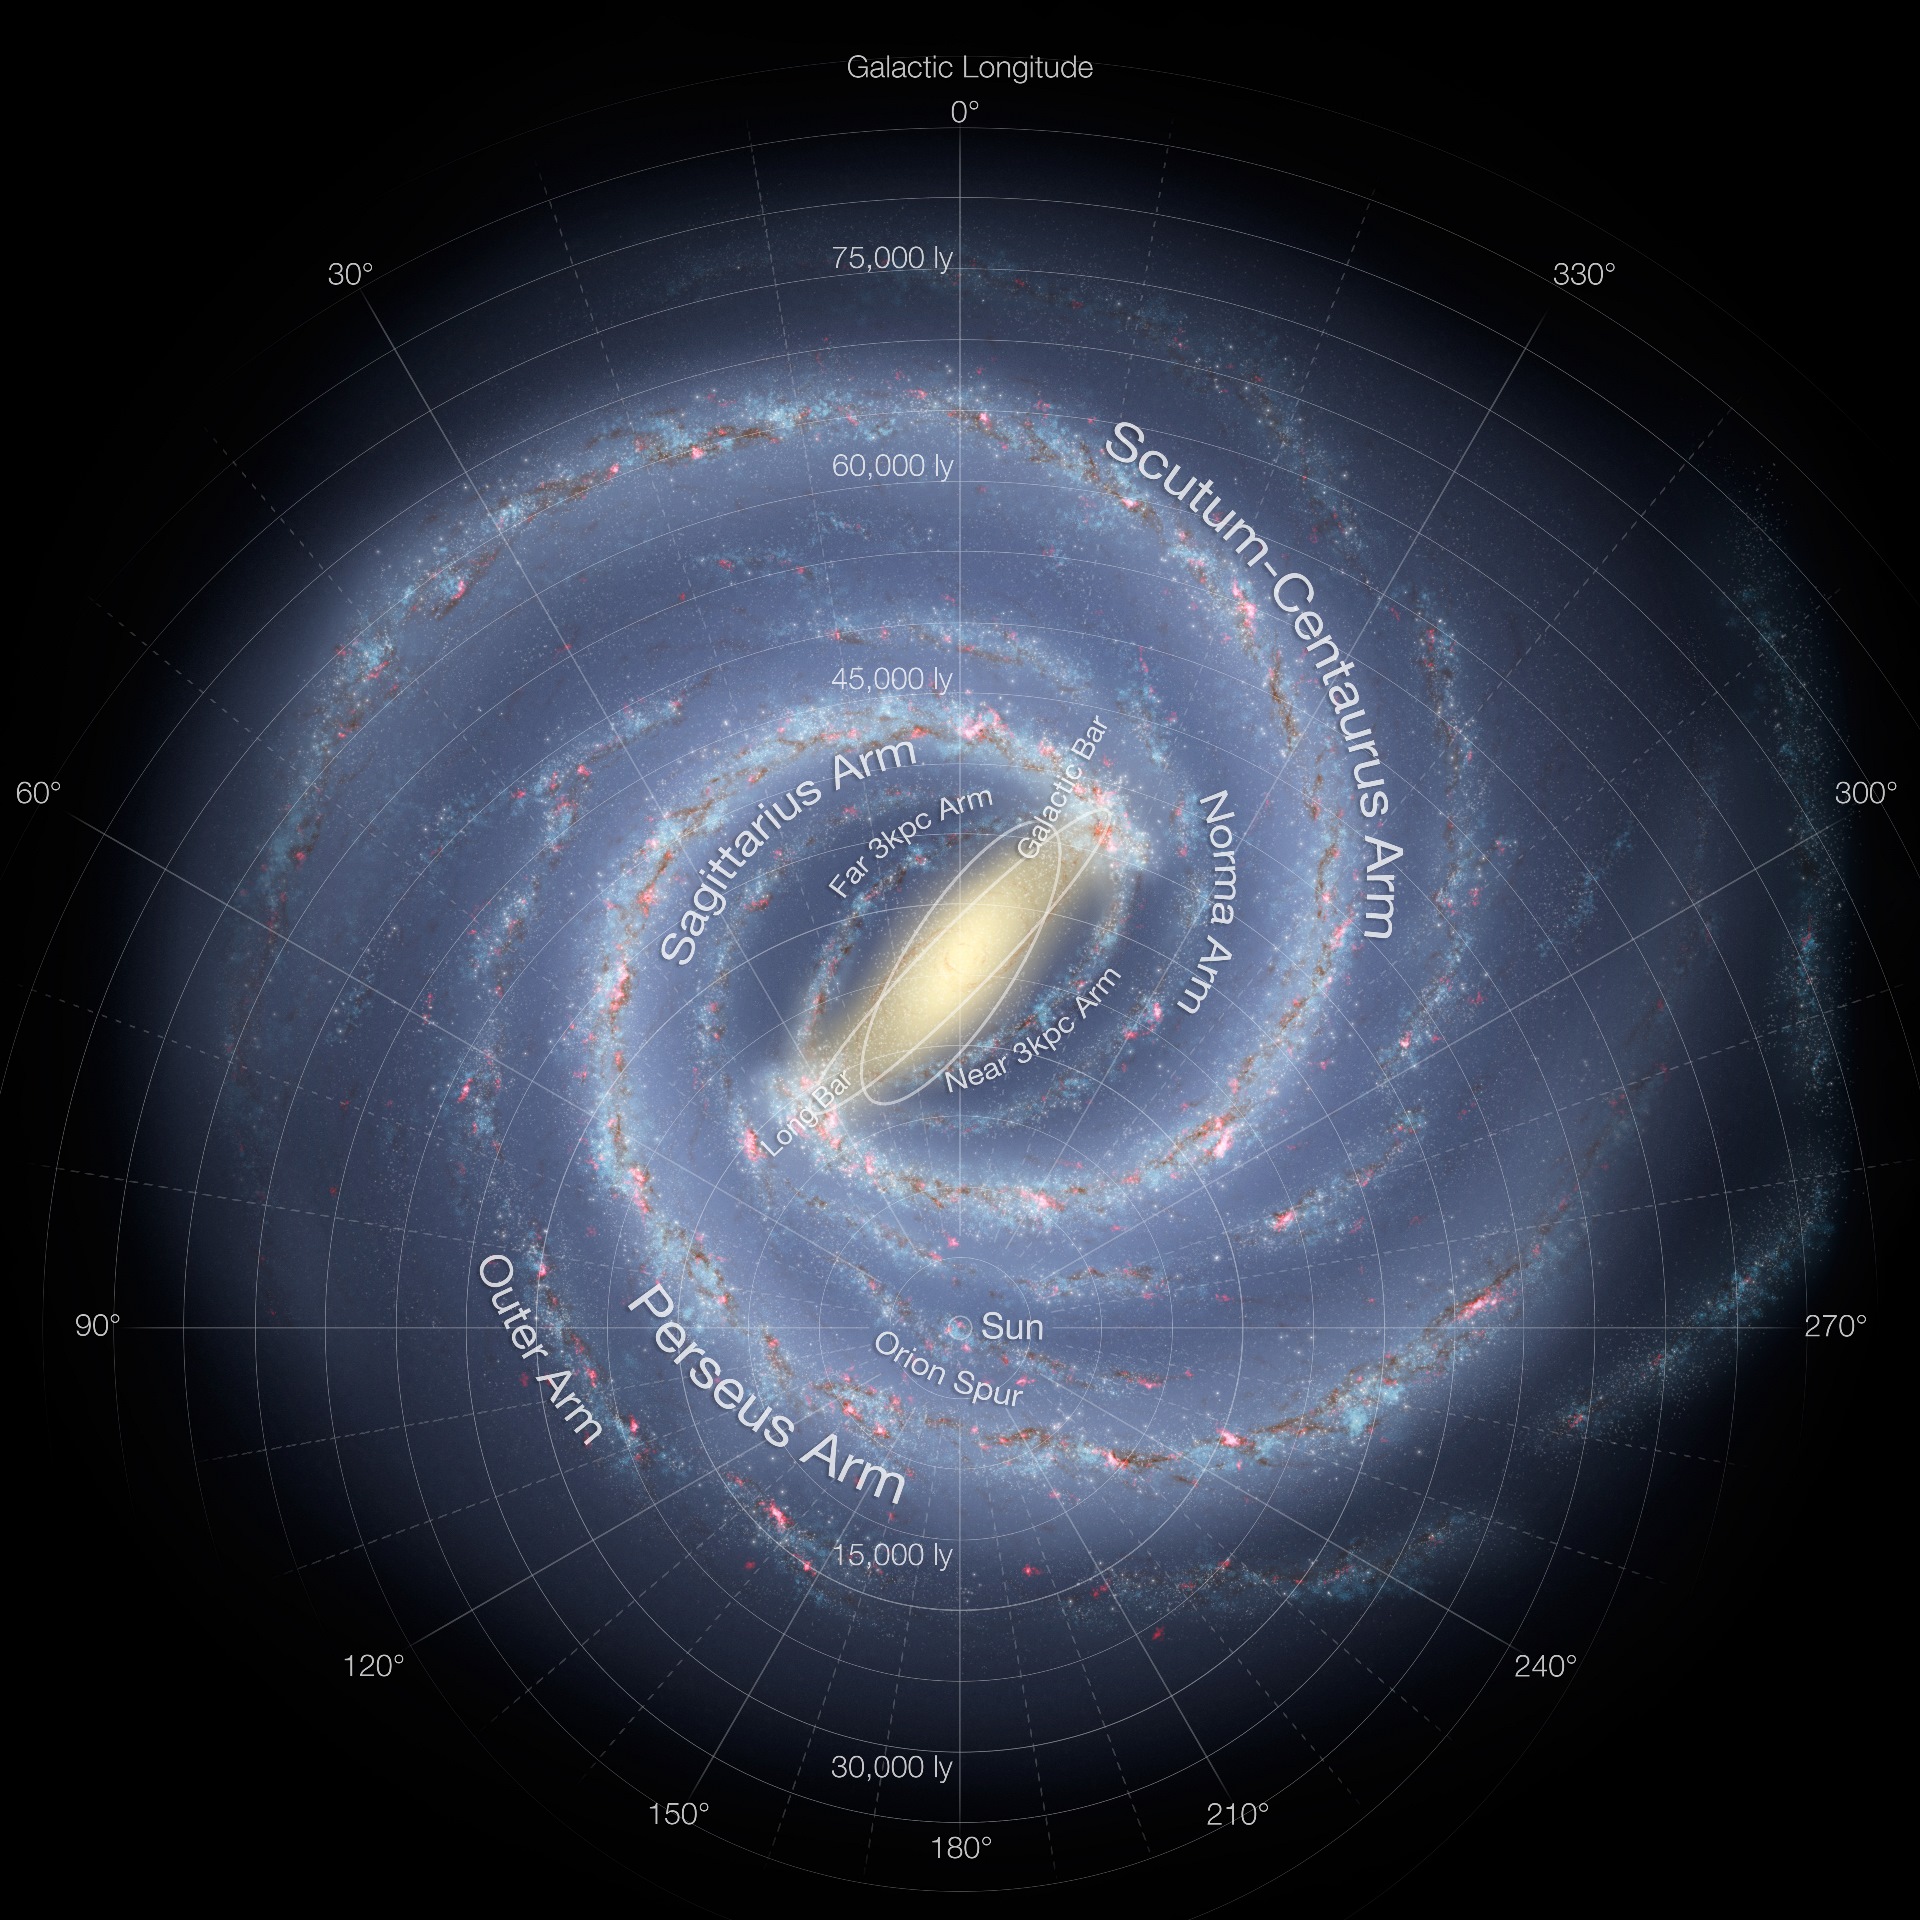 map of the Milky Way Galaxy